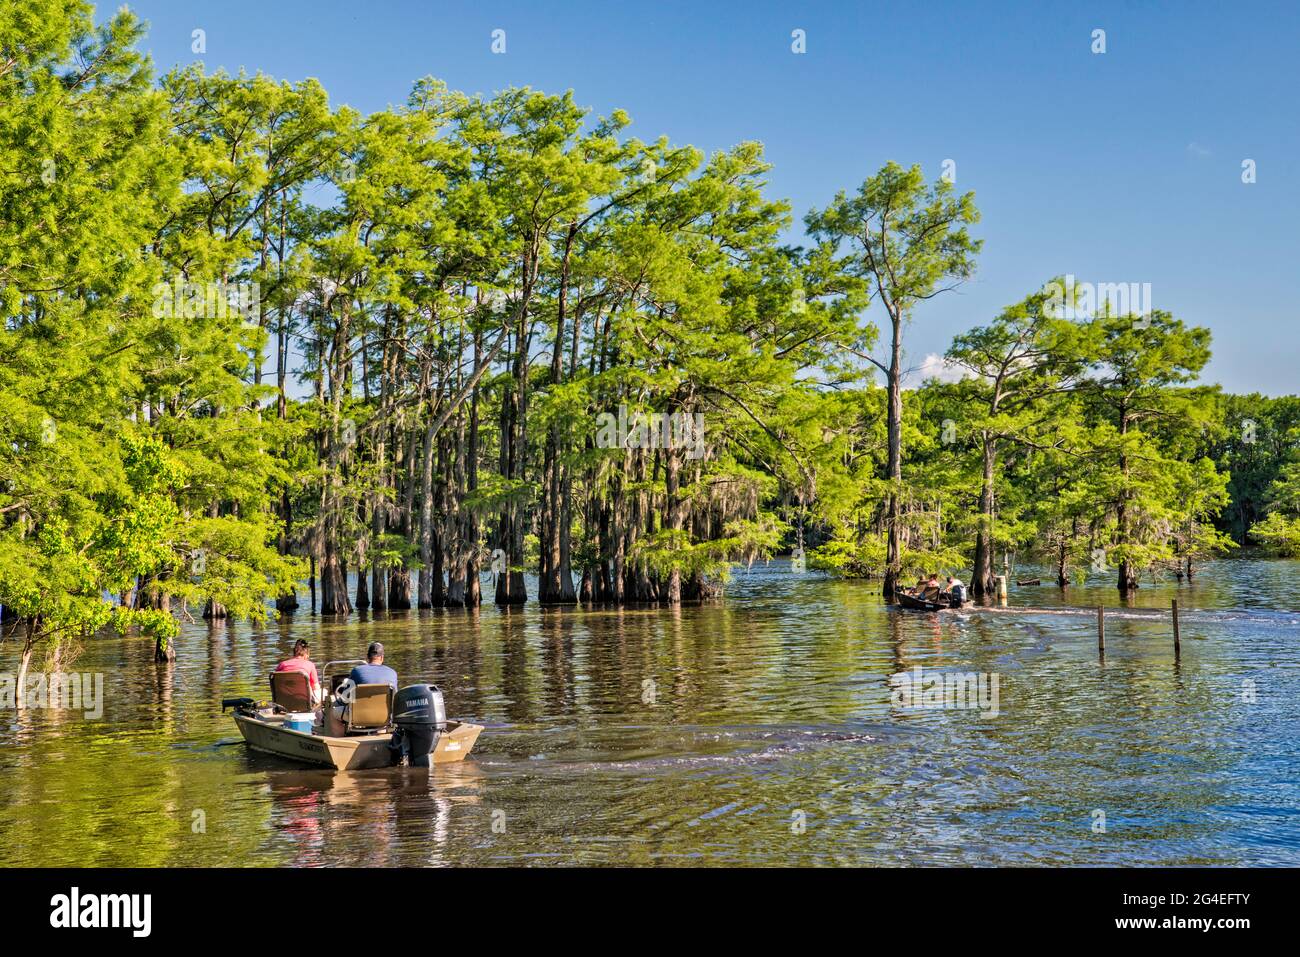 Boats, bald cypress trees in springtime, Potter's Point at Caddo Lake, Piney Woods region, Texas, USA Stock Photo